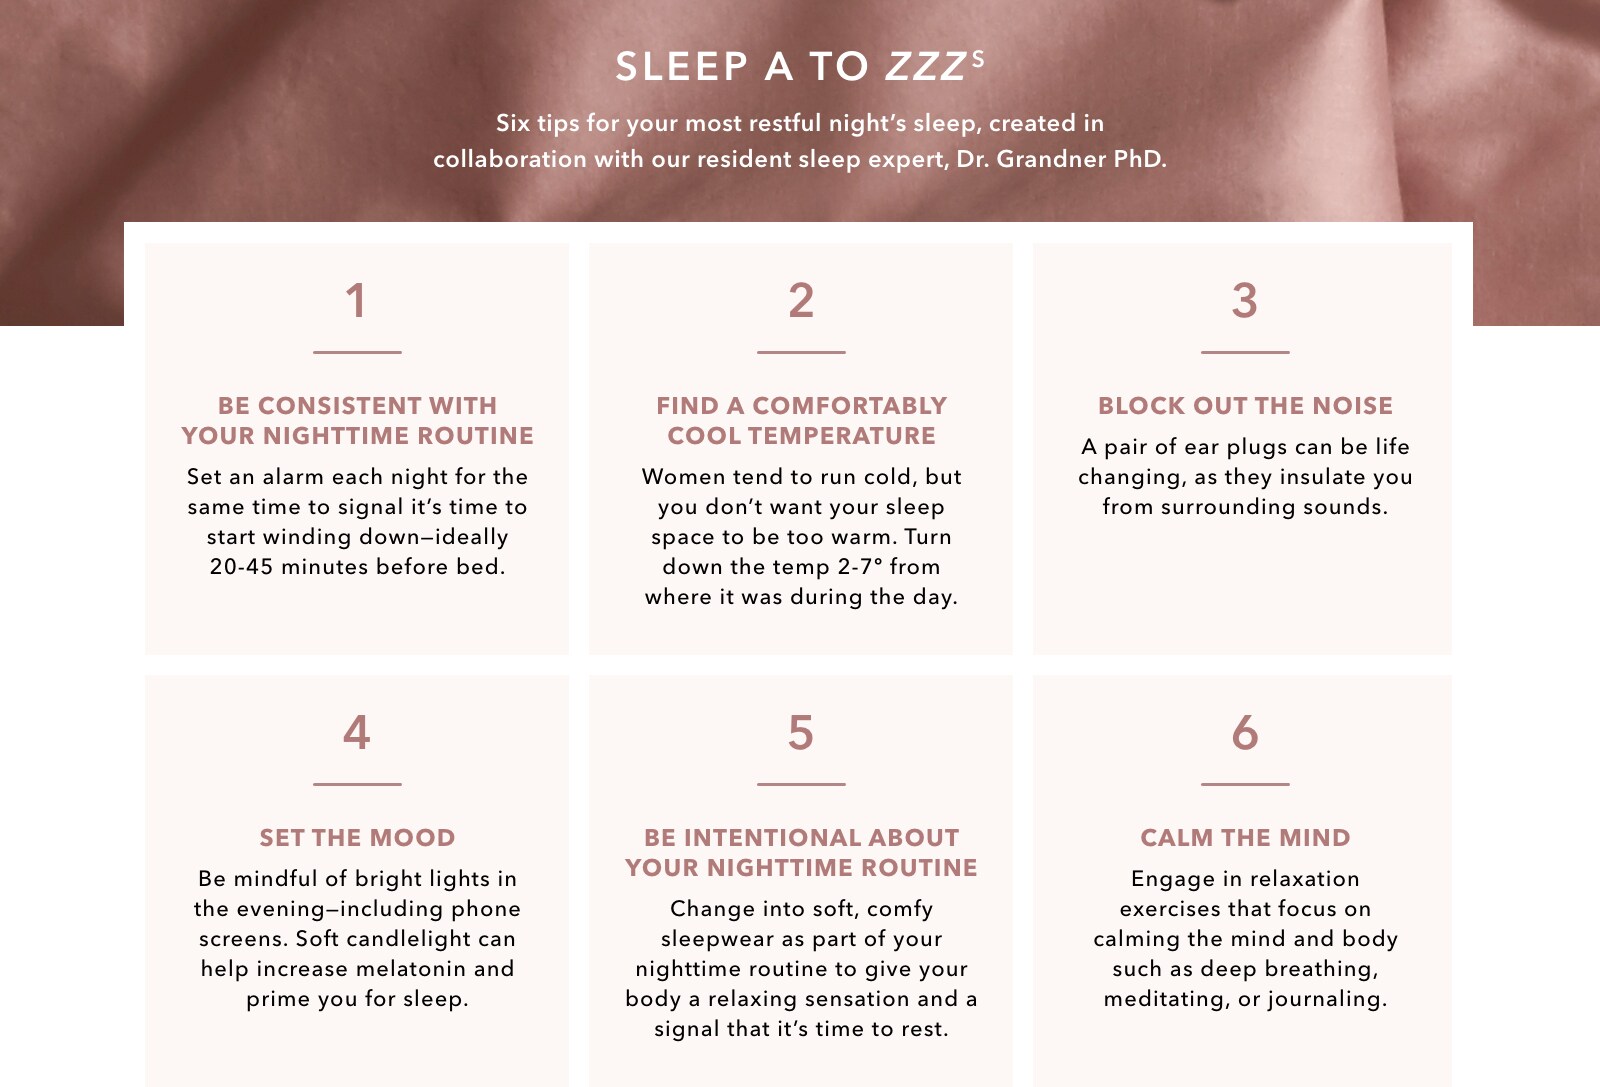 SLEEP A TO ZZZZs. Six tips for your most restful night's sleep, created in collaboration with our resident sleep expert, Dr. Grandner PhD. 1. Be consistent with your nighttime routine: Set an alarm each night for the same time to signal it's time to wind down—ideally 20-45 minutes before bed. 2. Find a comfortably cool temperature: Women tend to run cold, but you don’t want your sleep space to be too warm. Turn down the temp 2-7 degrees from where it was during the day. 3. Block out the noise: A pair of ear plugs can be life changing, as they insulate you from surrounding sounds. 4. Set the mood: Be mindful of bright lights in the evening – including phone screens. Soft candlelight can help increase melatonin and prime you for sleep. 5. Be intentional about your nighttime routine: Change into soft, comfy sleepwear as part of your nighttime routine to give your body a relaxing sensation and a signal that it’s time to rest. 6. Calm the mind: Engage in relaxation exercises that focus on calming the mind and body such as deep breathing, meditating or journaling.